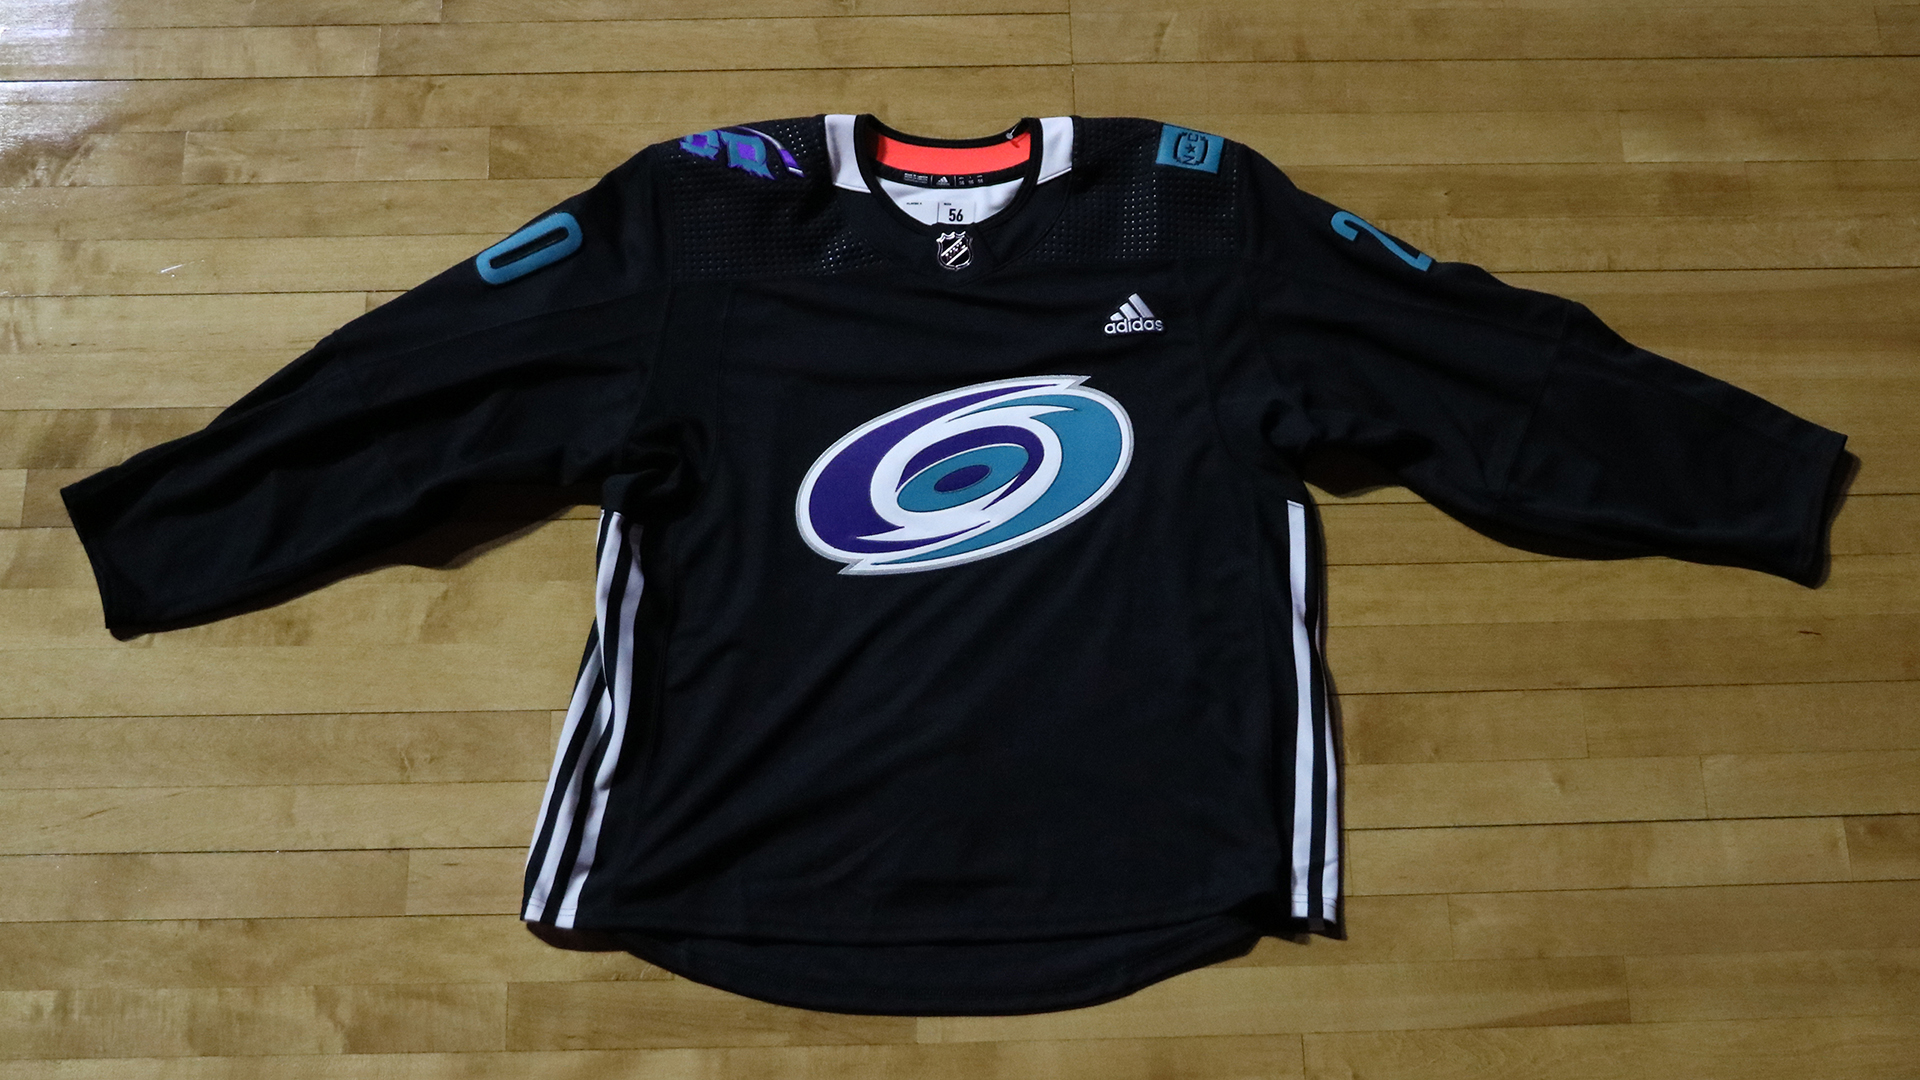 The Hurricanes rocked Hornets inspired jerseys for warm ups on Friday. .  (📷: @canes)